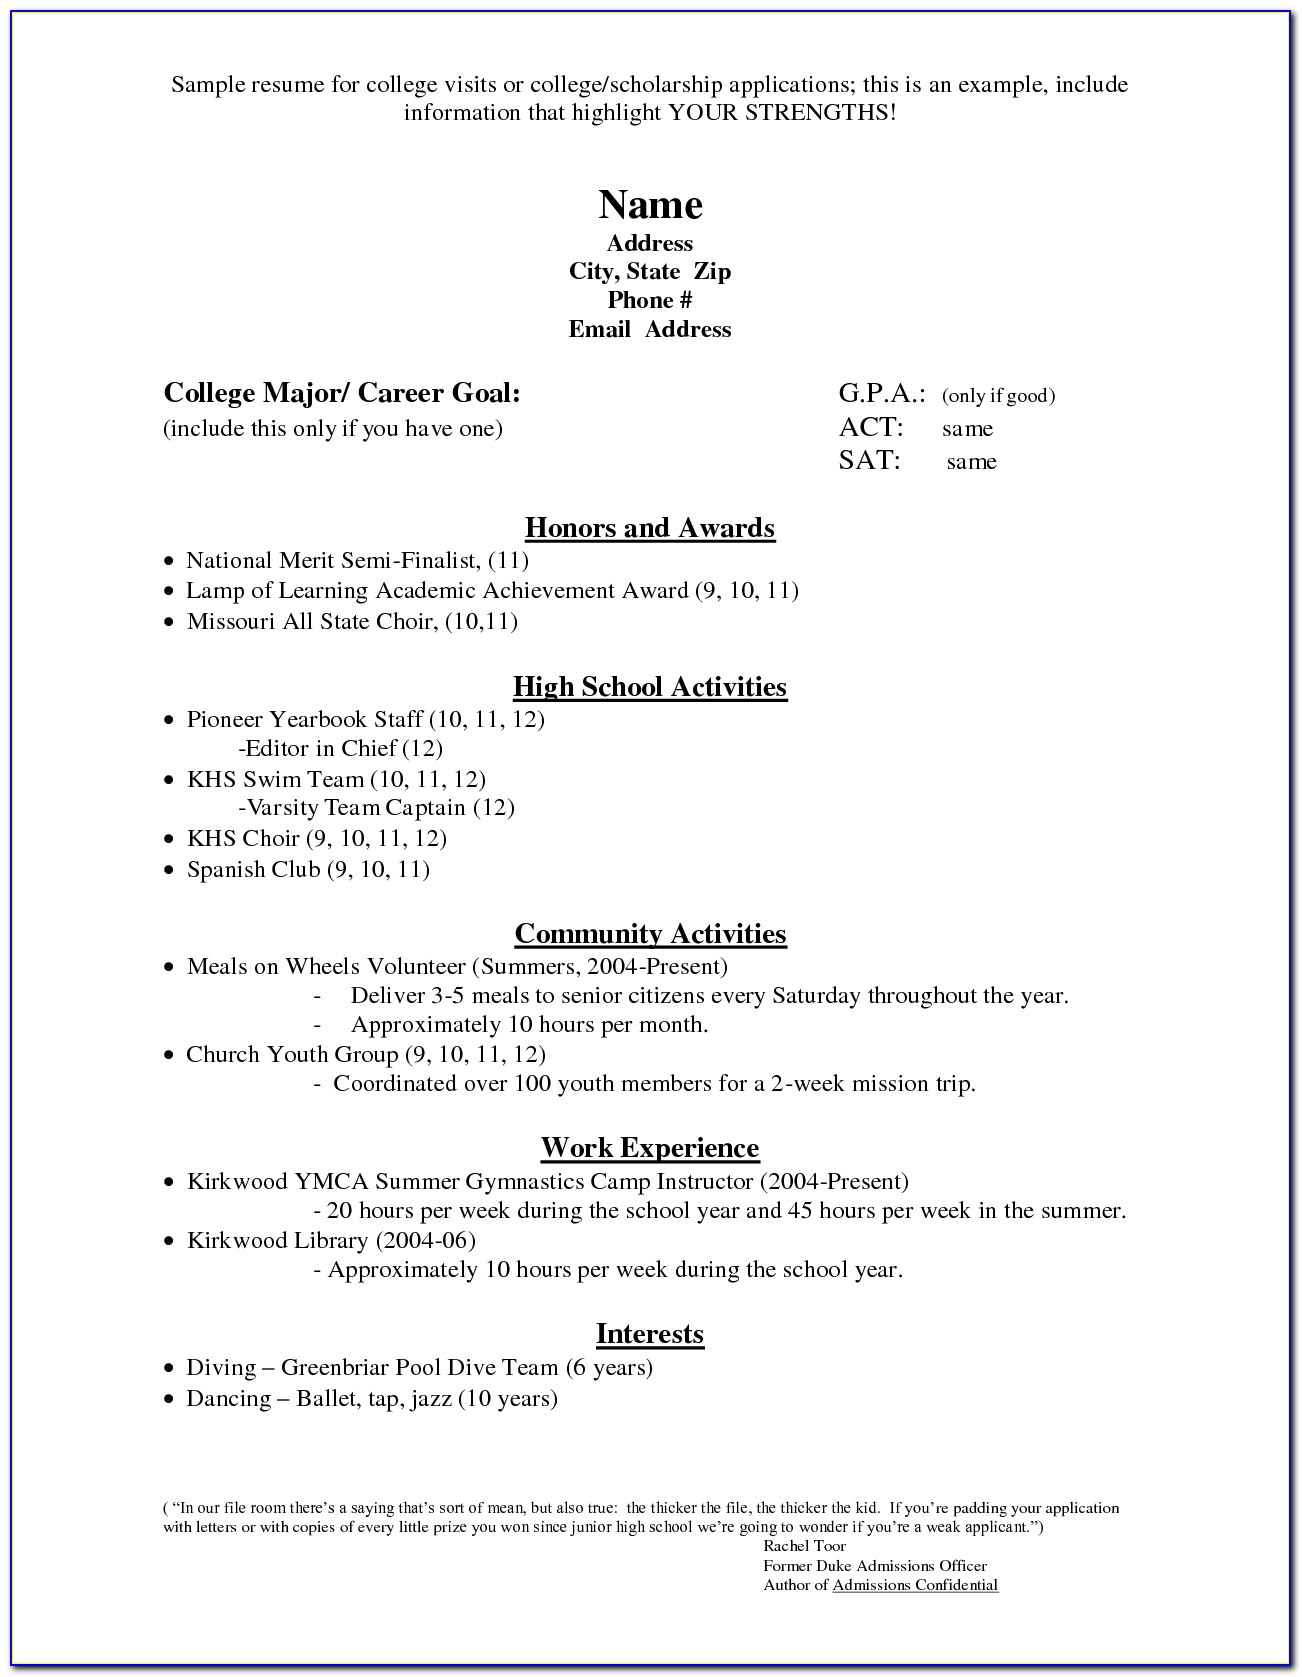 College Application Resume Objective Examples